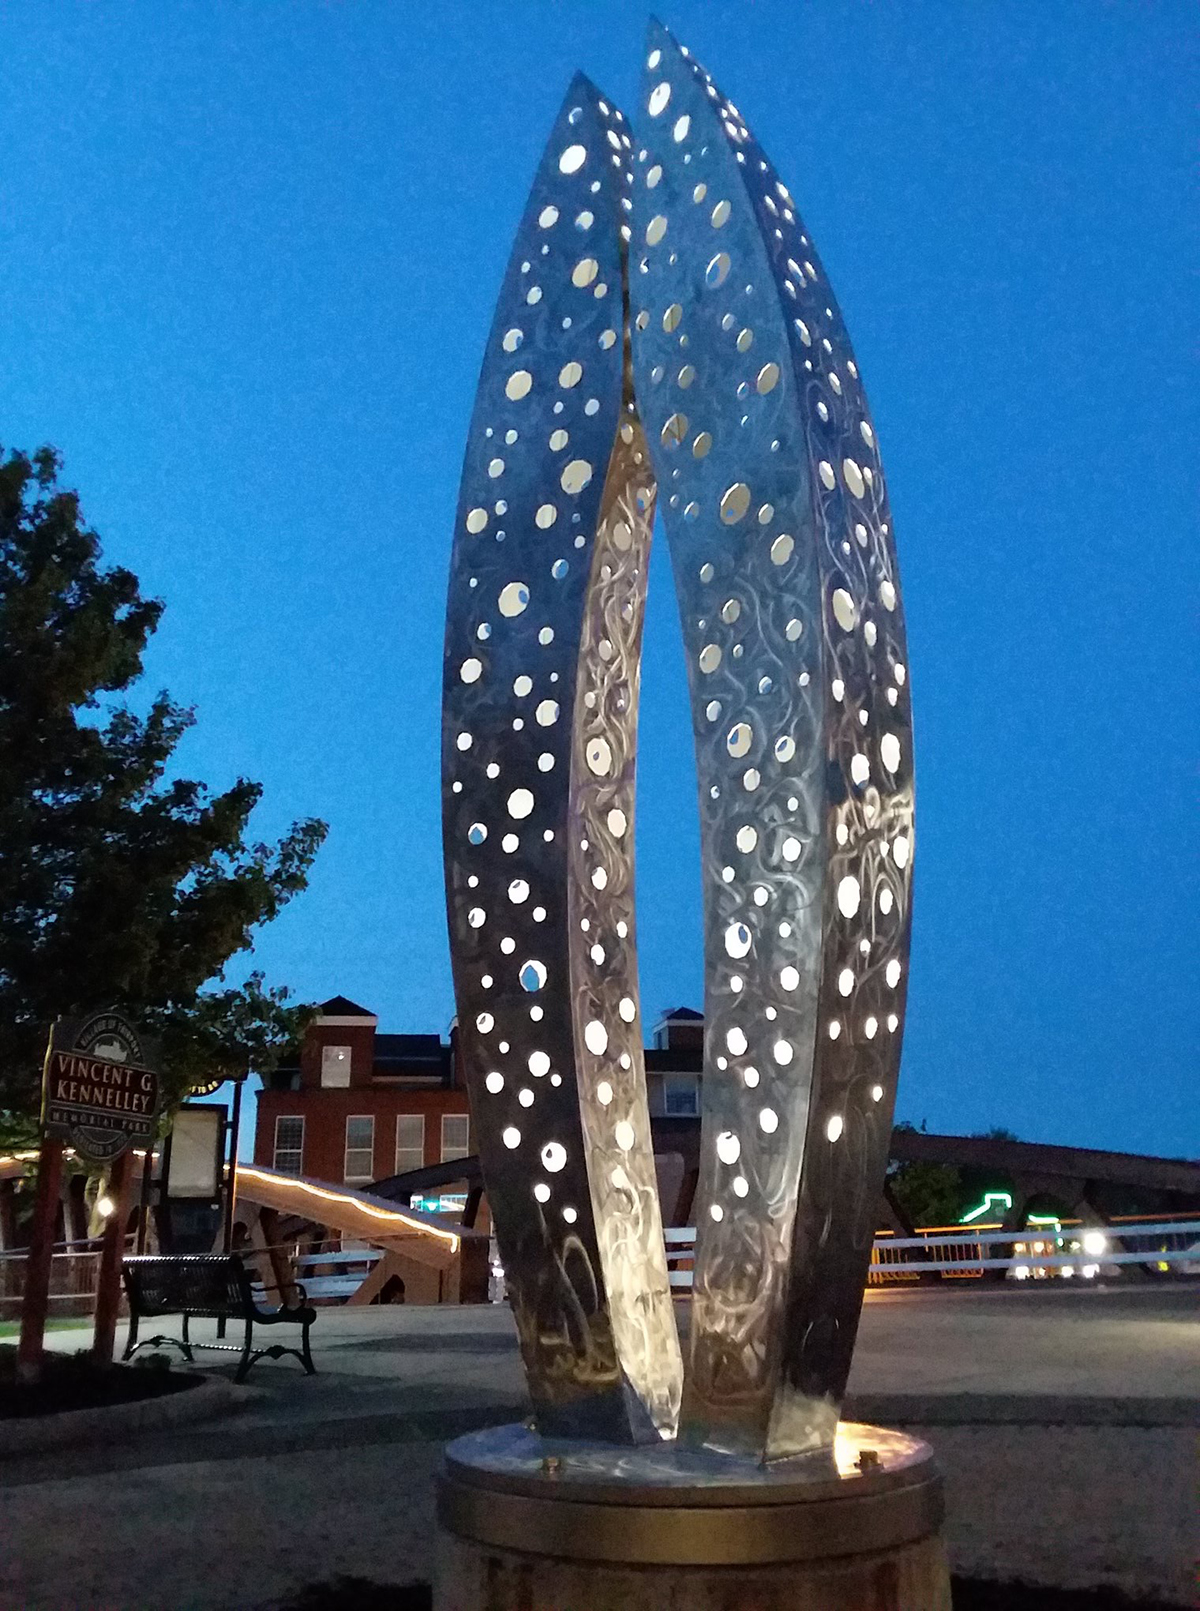 The "Connection" sculpture lit up at night